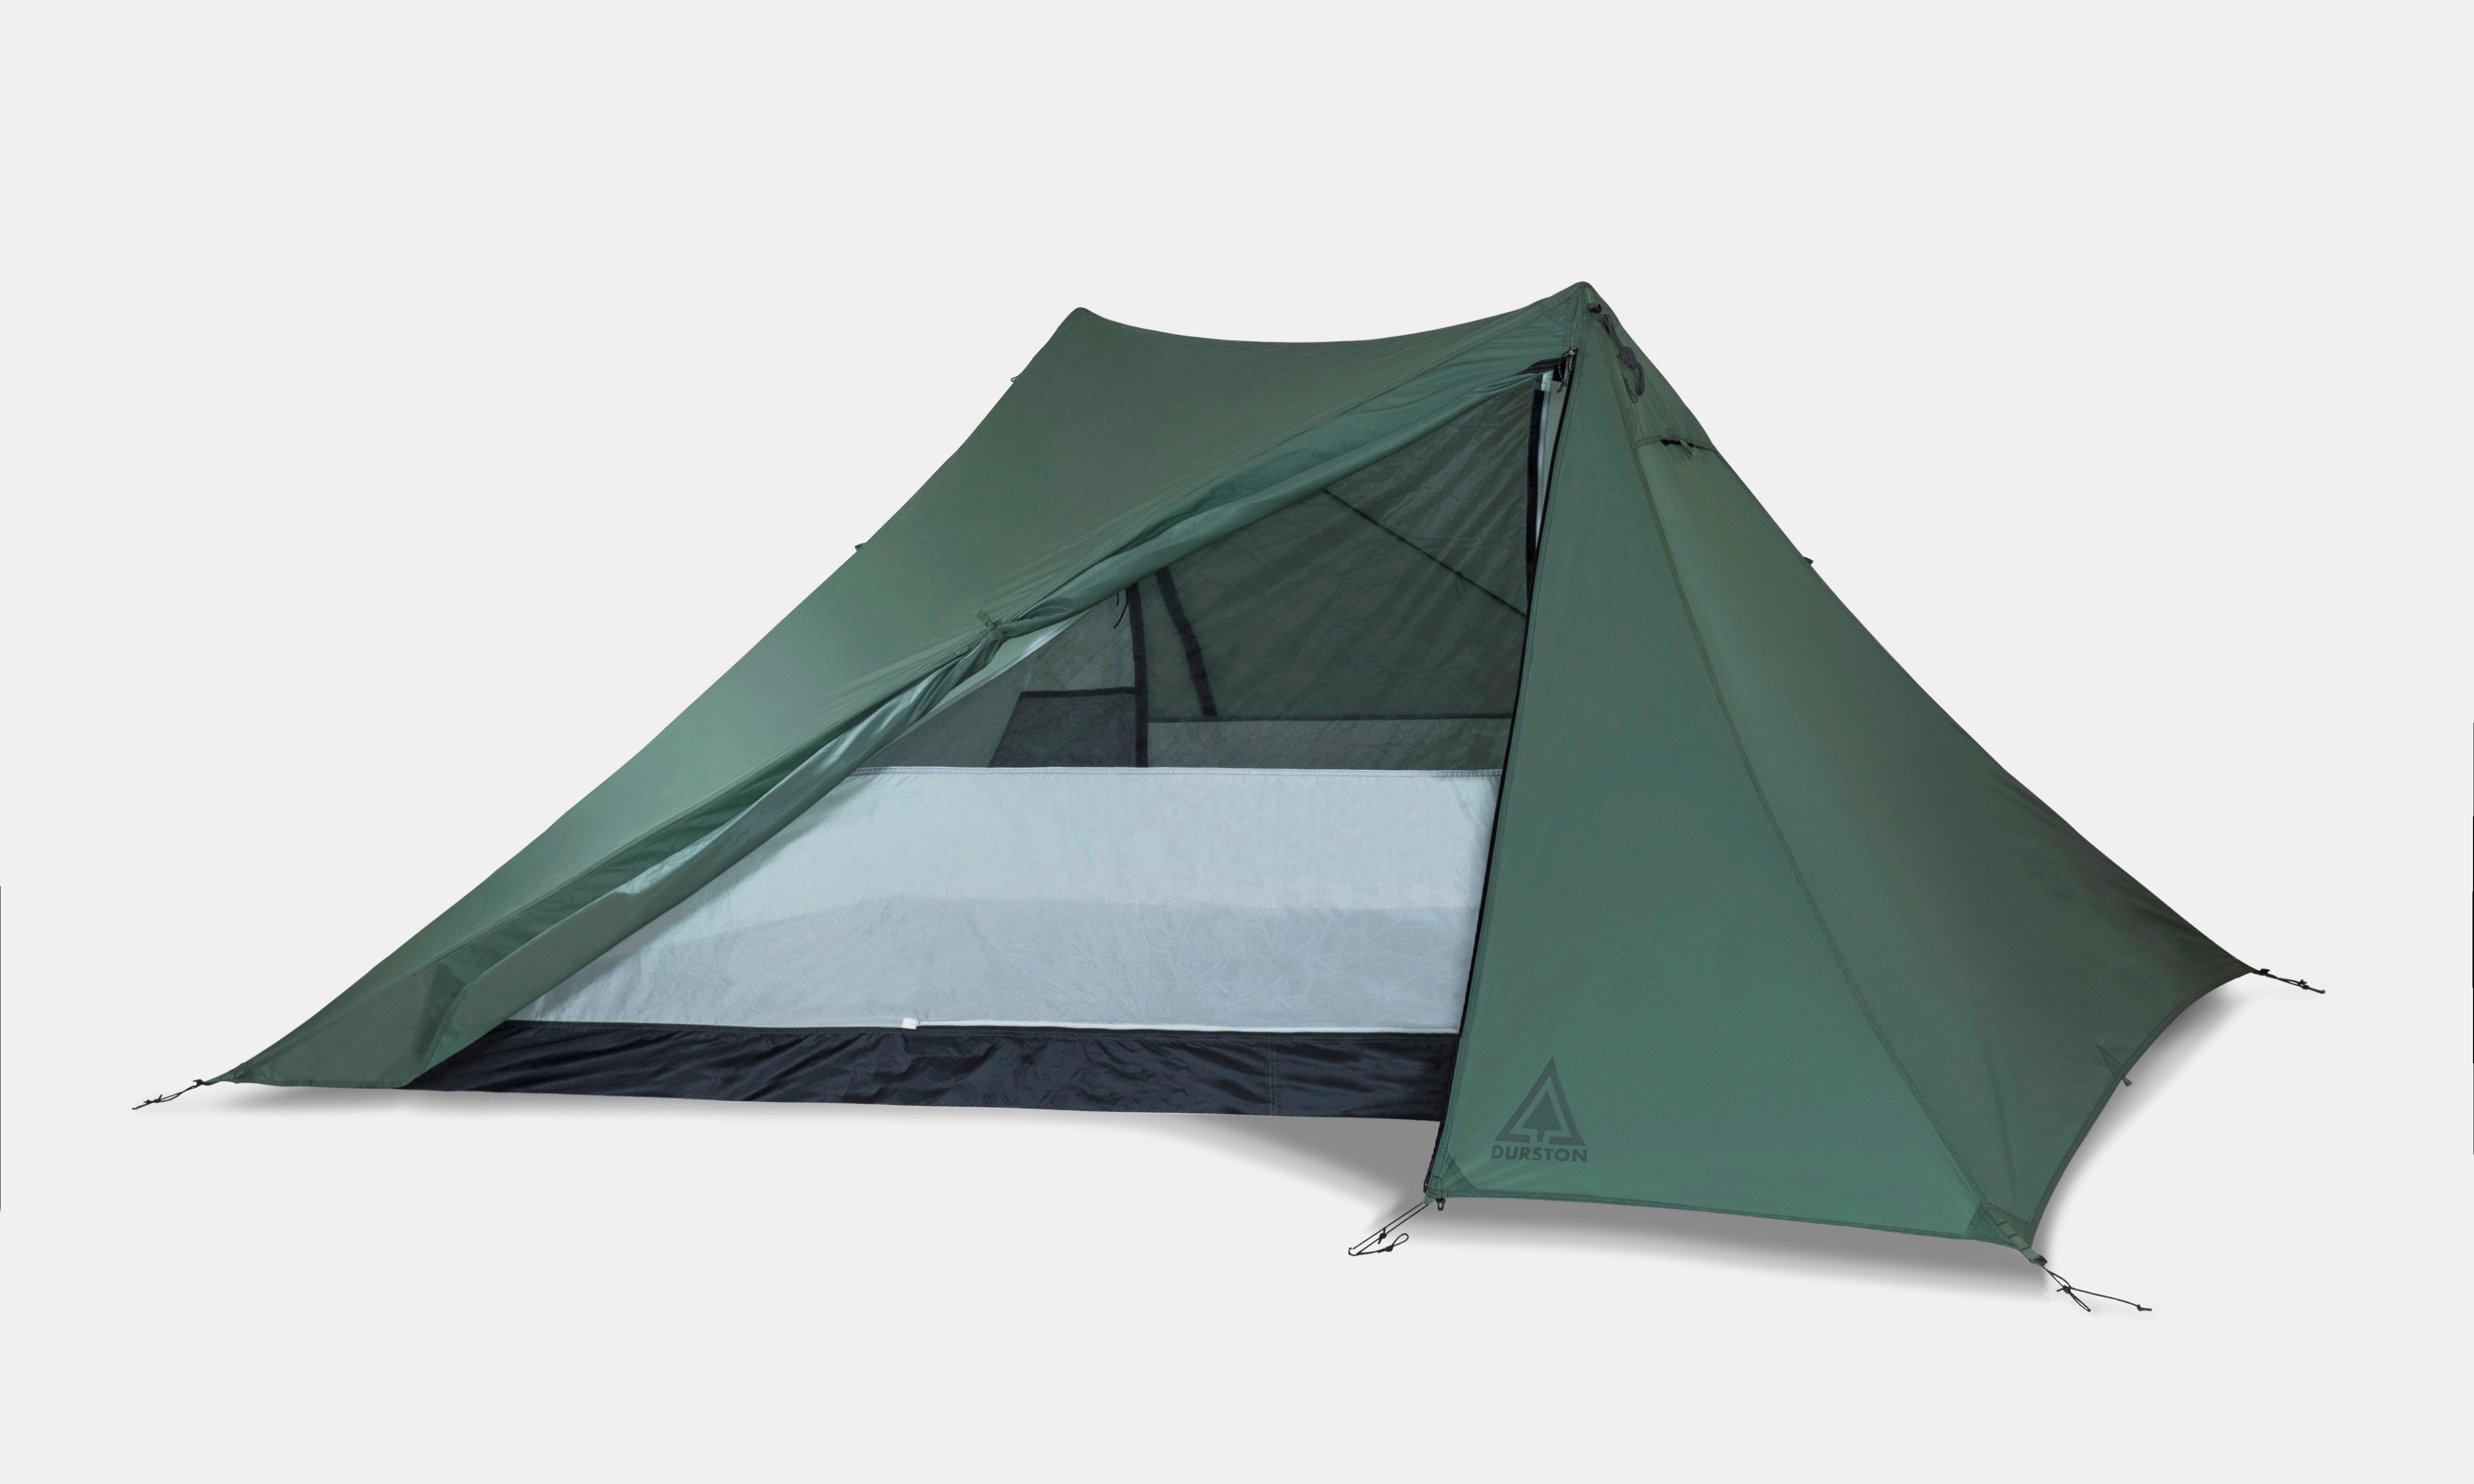 Durston Gear X-Mid 2 Solid Ultralight Backpacking and Trekking Pole Tent Designed by Dan Durston sold by Kaviso